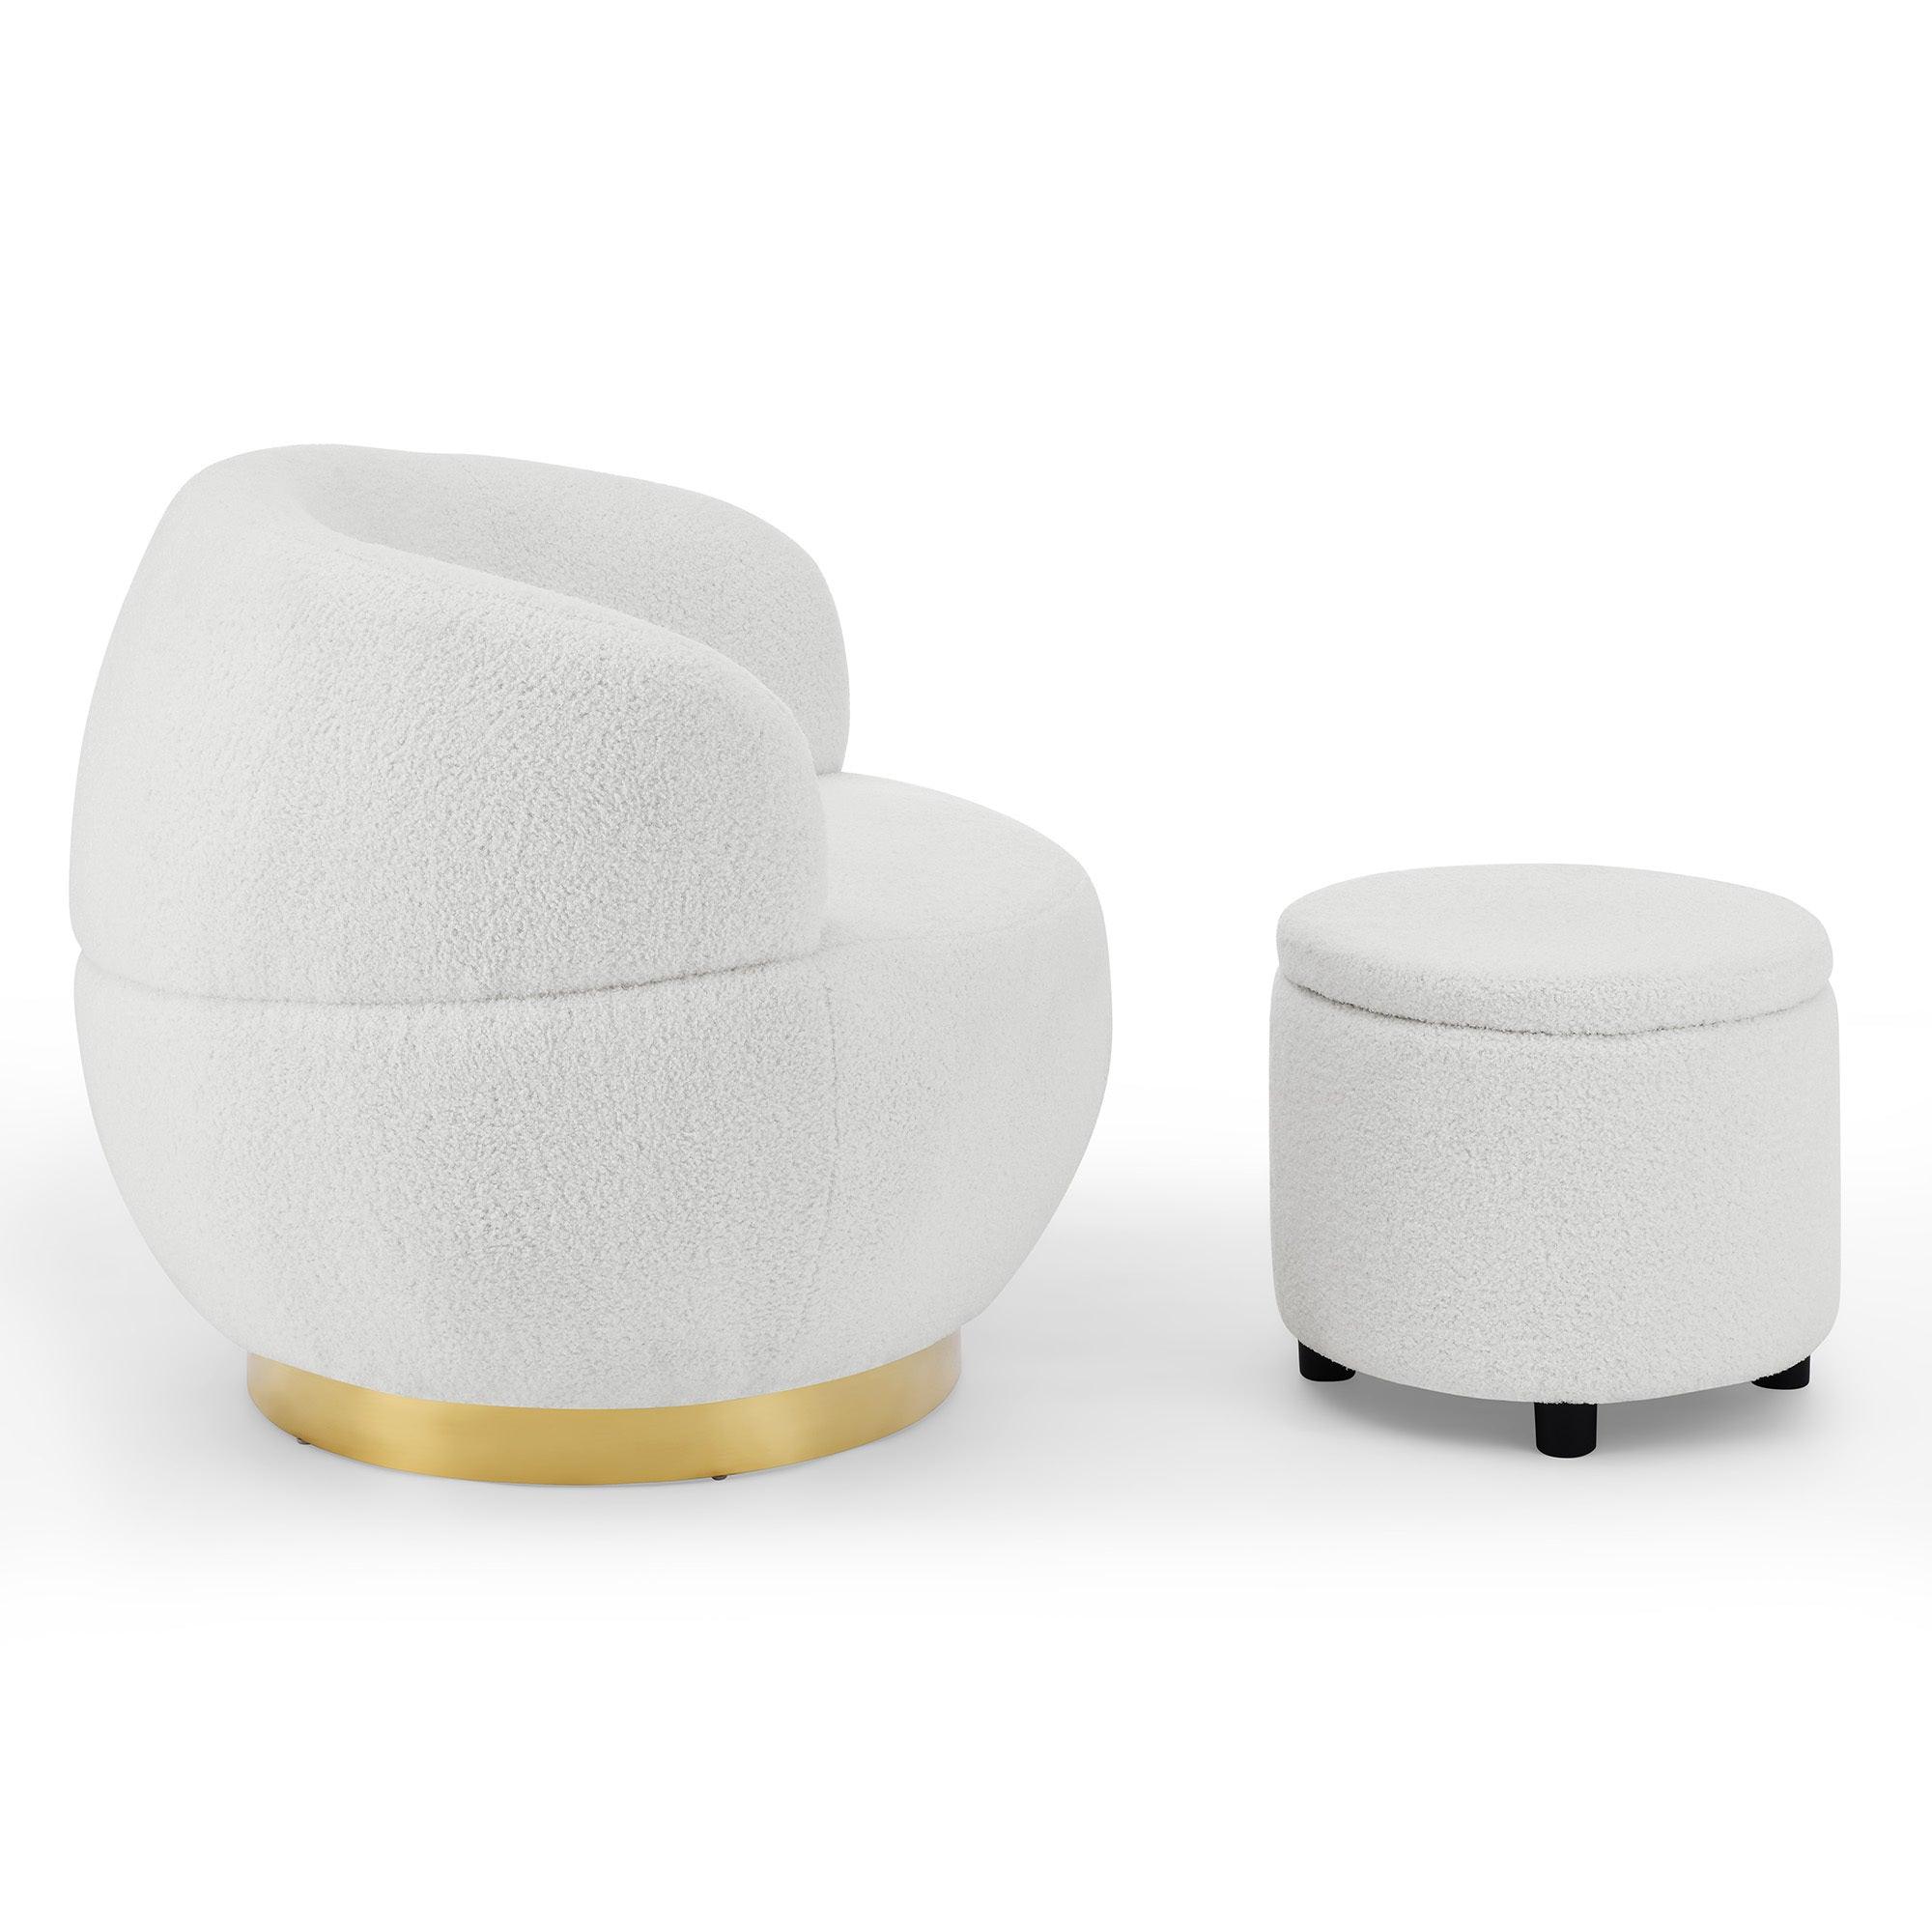 Shop Swviel Barrel Chair with Gold Stainless Steel Base, with Storage Ottoman, Teddy Fabric, Ivory Mademoiselle Home Decor